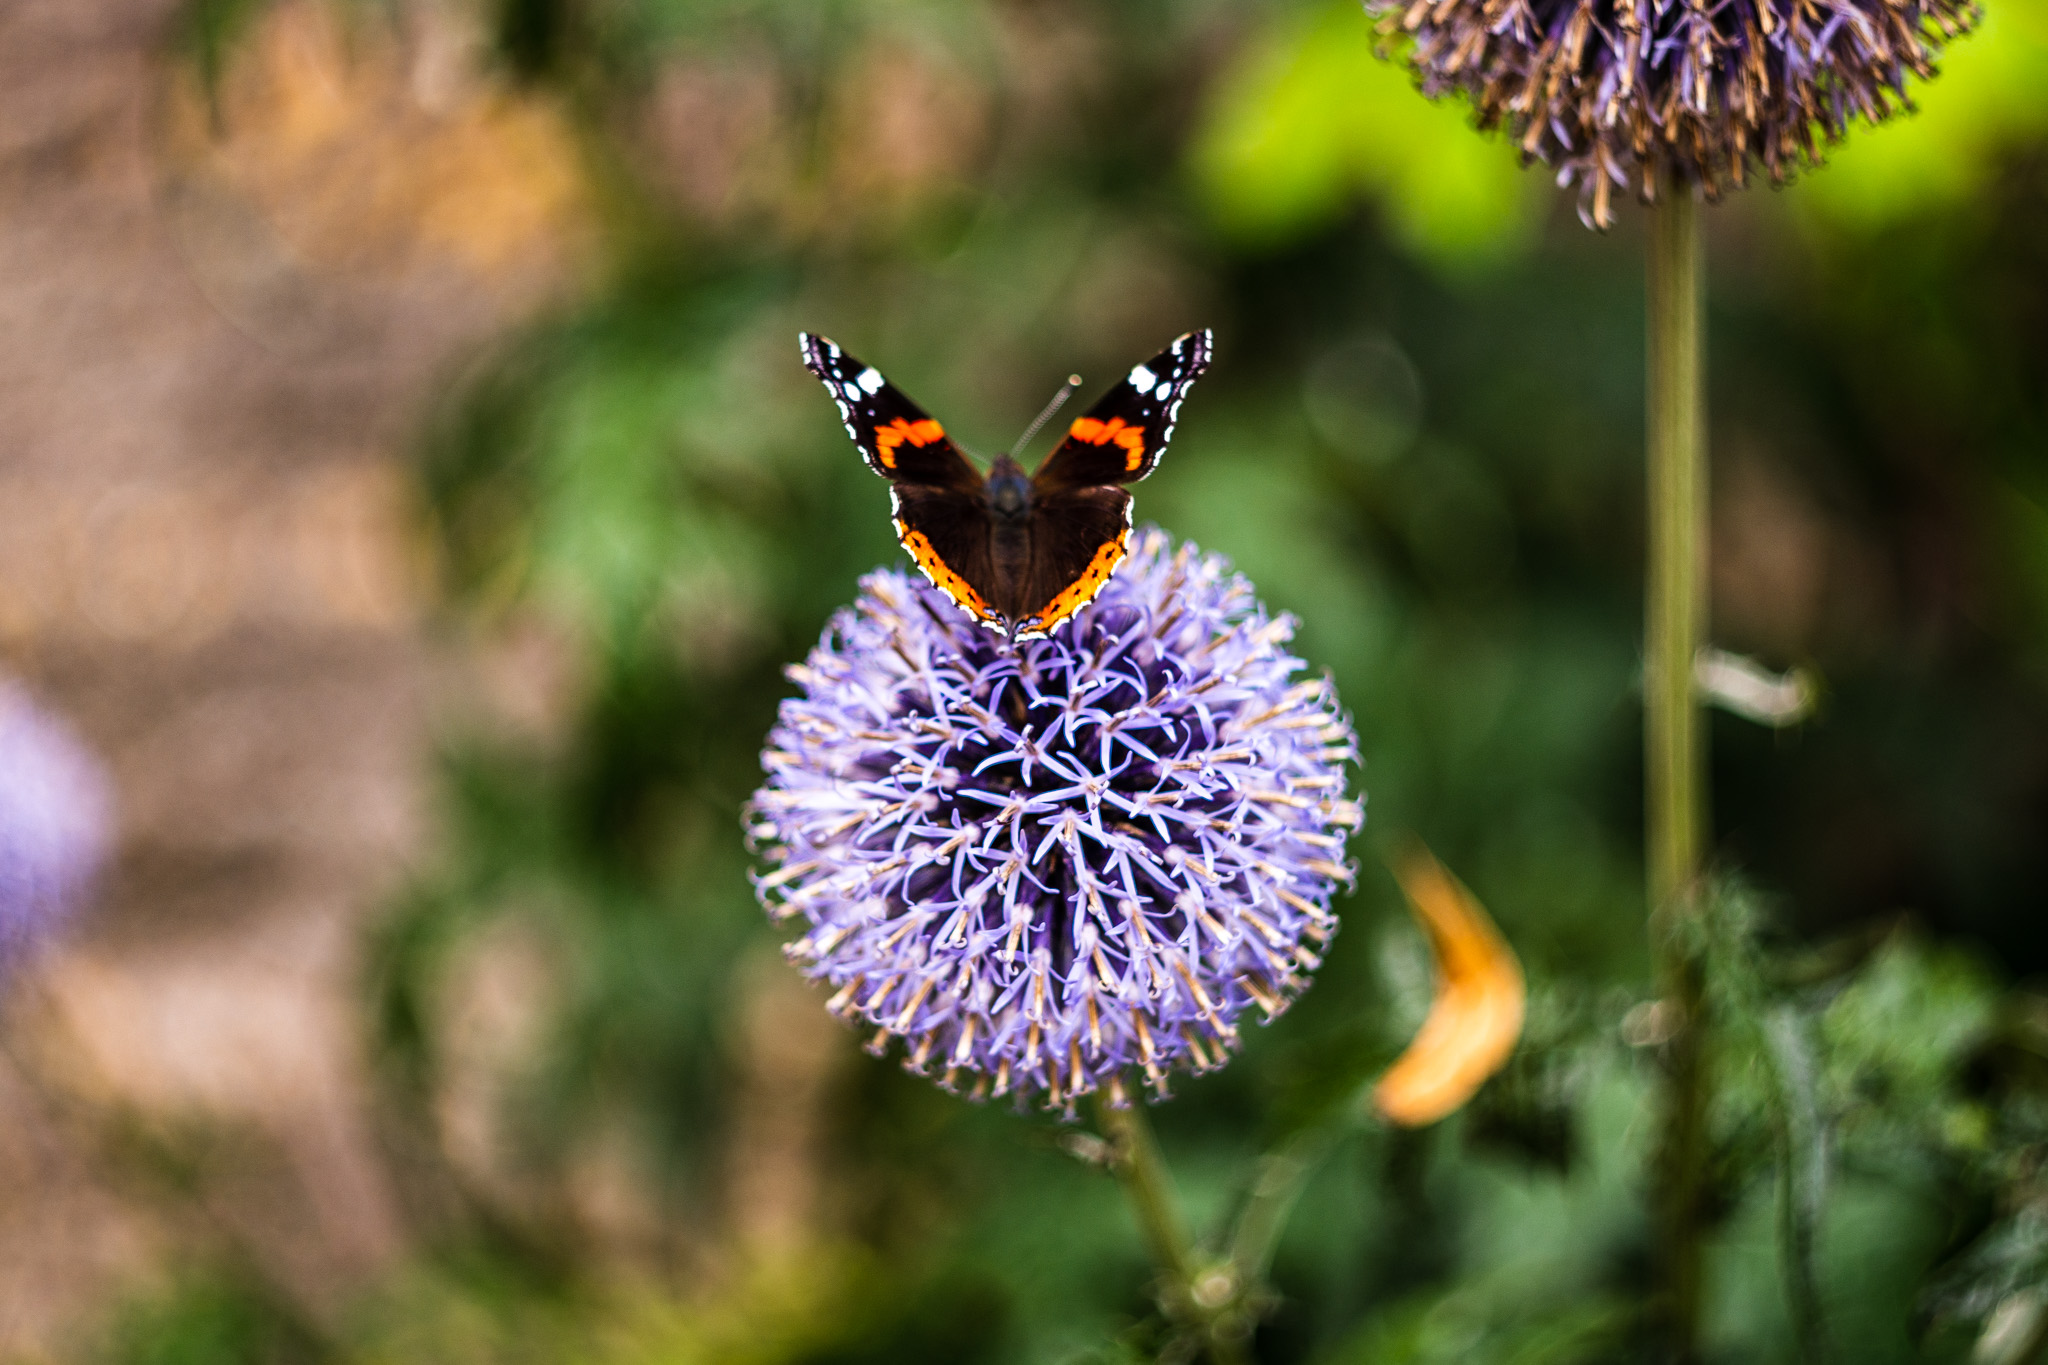 A Red Admiral Butterfly resting on the Blue Globe Thistle.